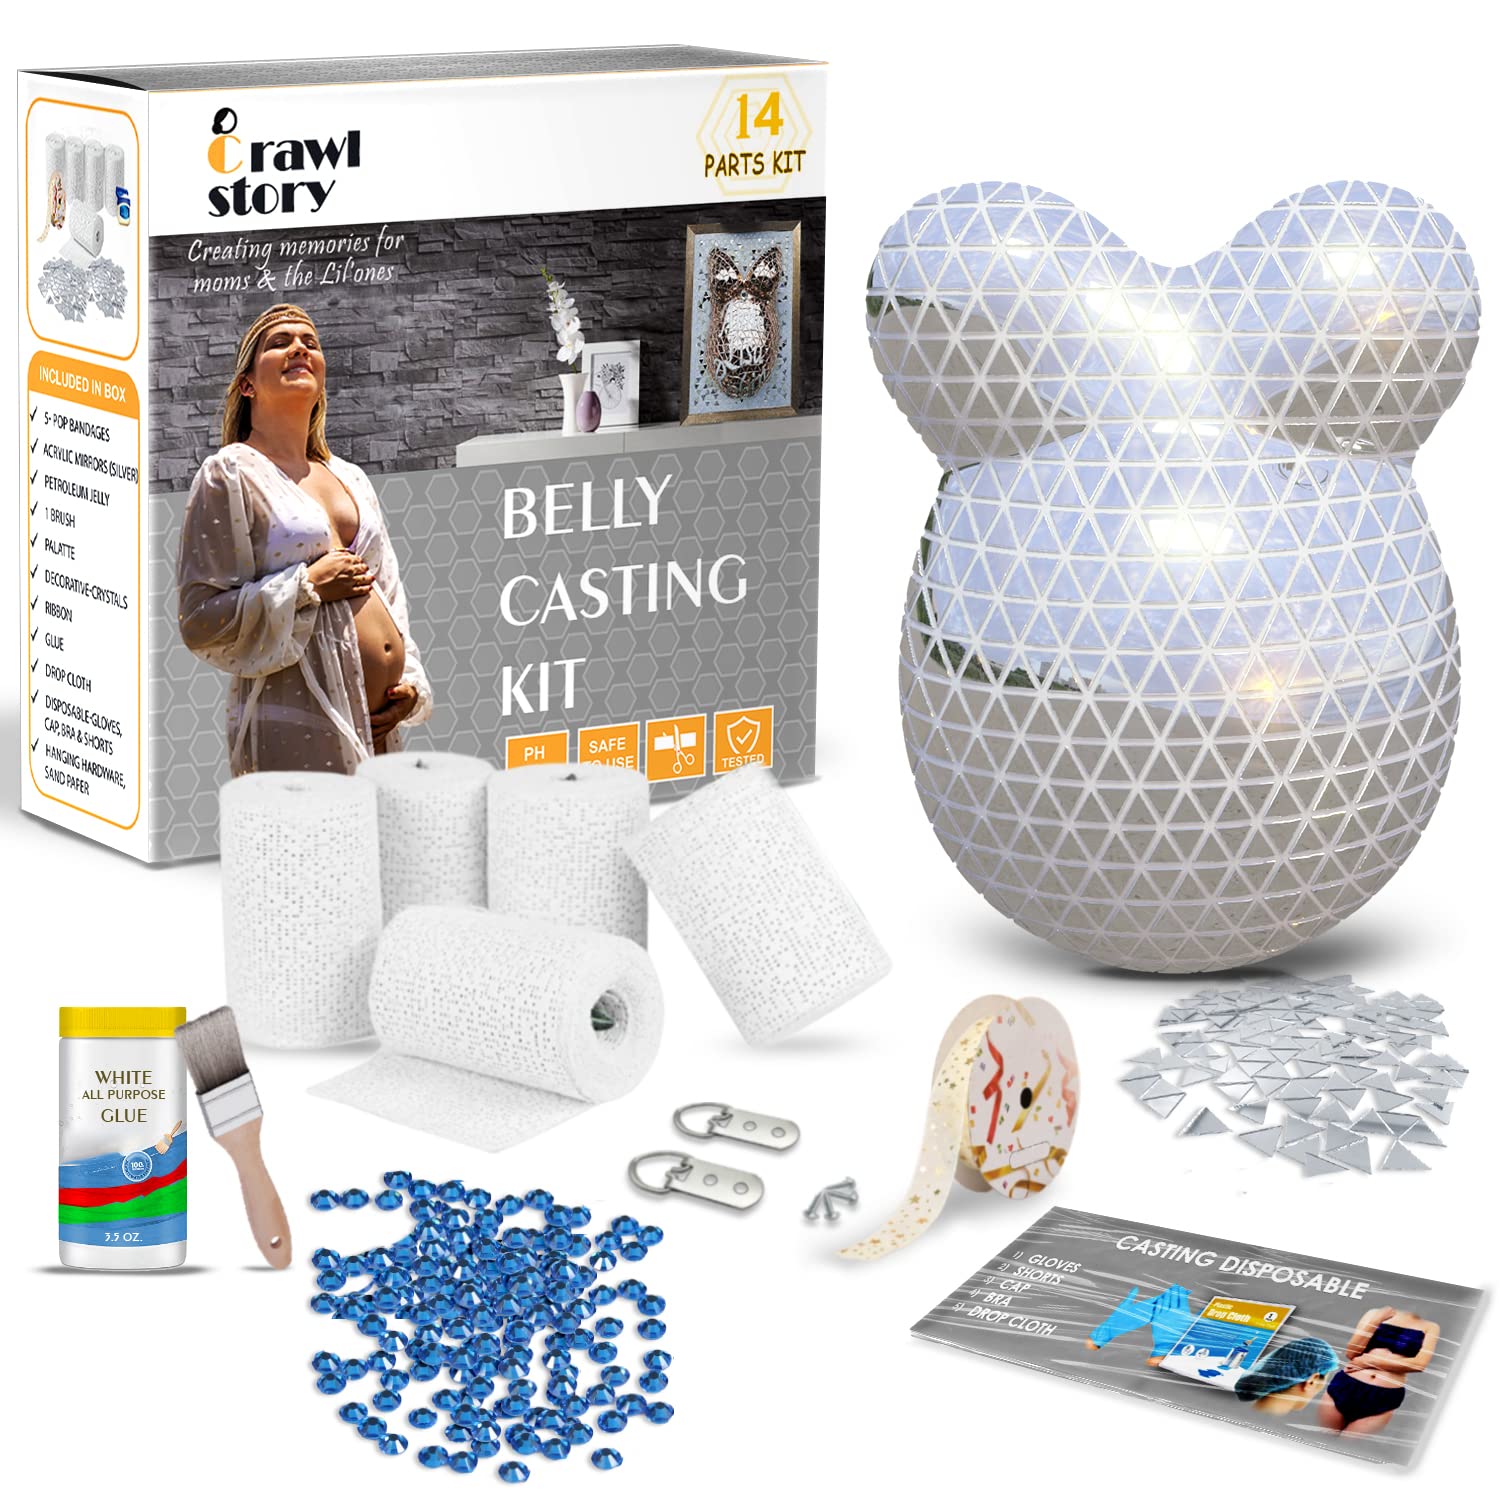 Crawl Story Belly Cast Kit Pregnancy-baby Casting Kit with 5-plaster Cloth Roll, Hanging Hardware & Decorative Items Perfect Baby Shower & Pregnancy